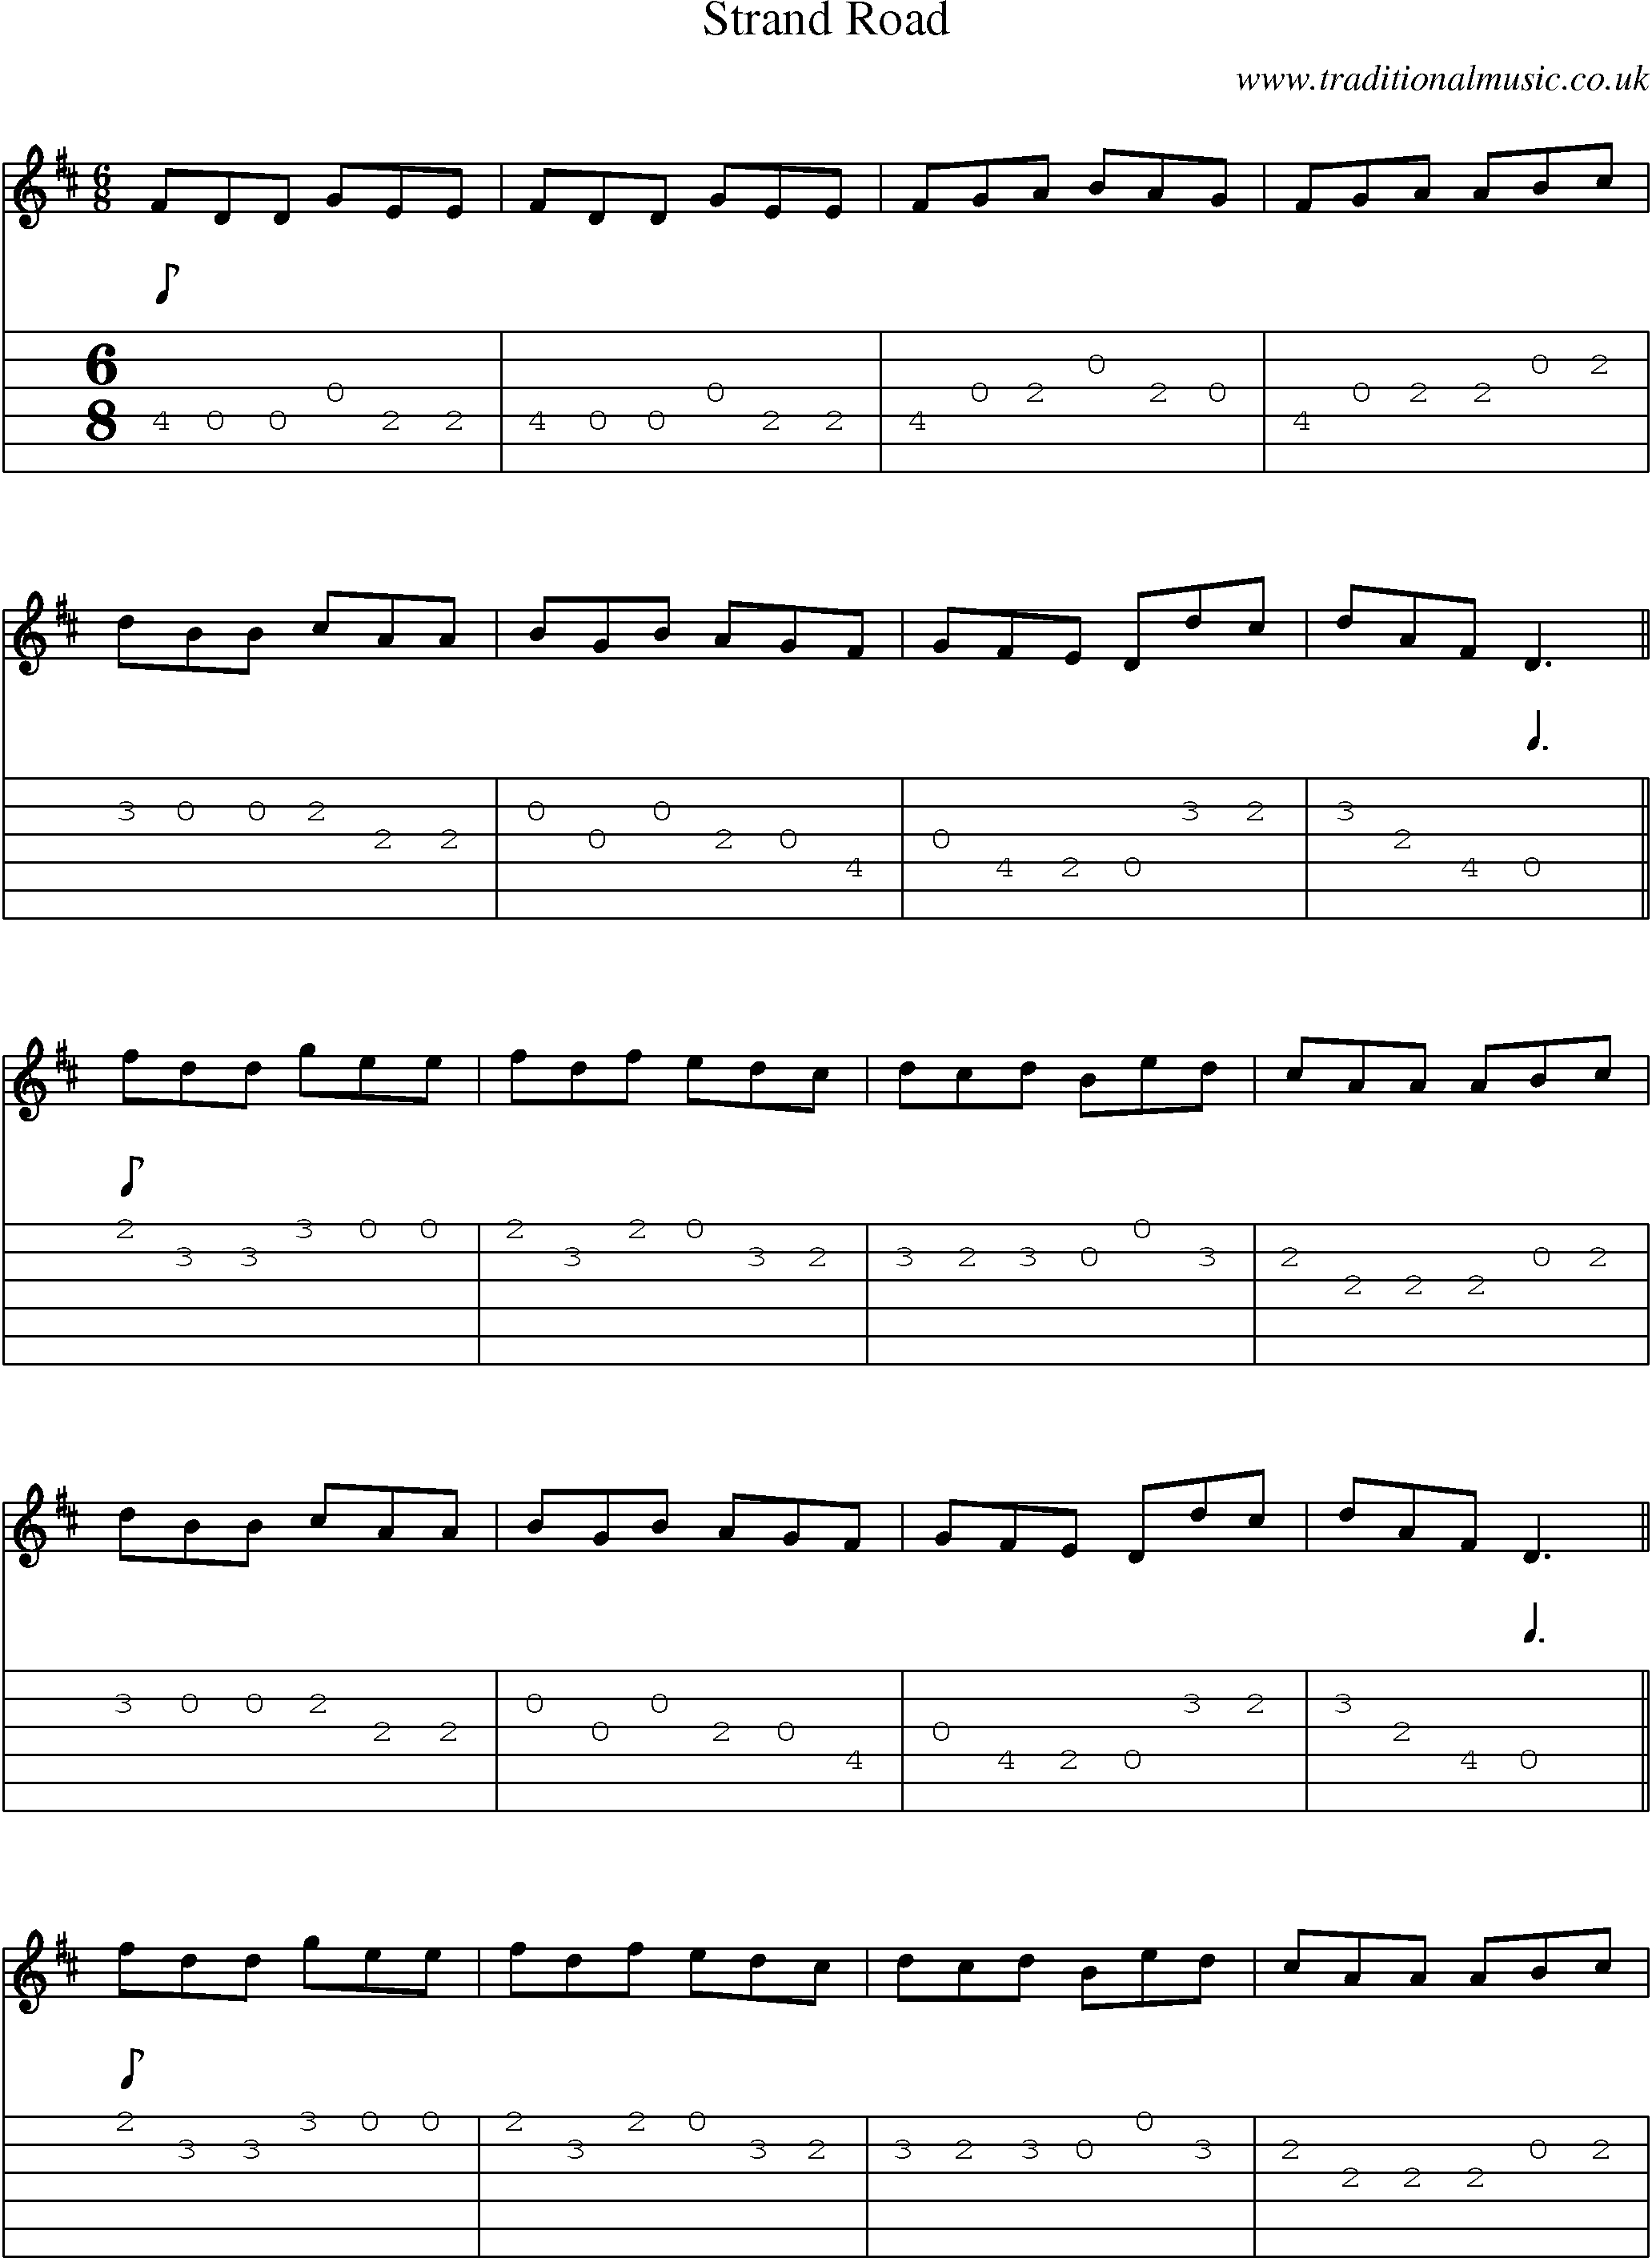 Music Score and Guitar Tabs for Strand Road